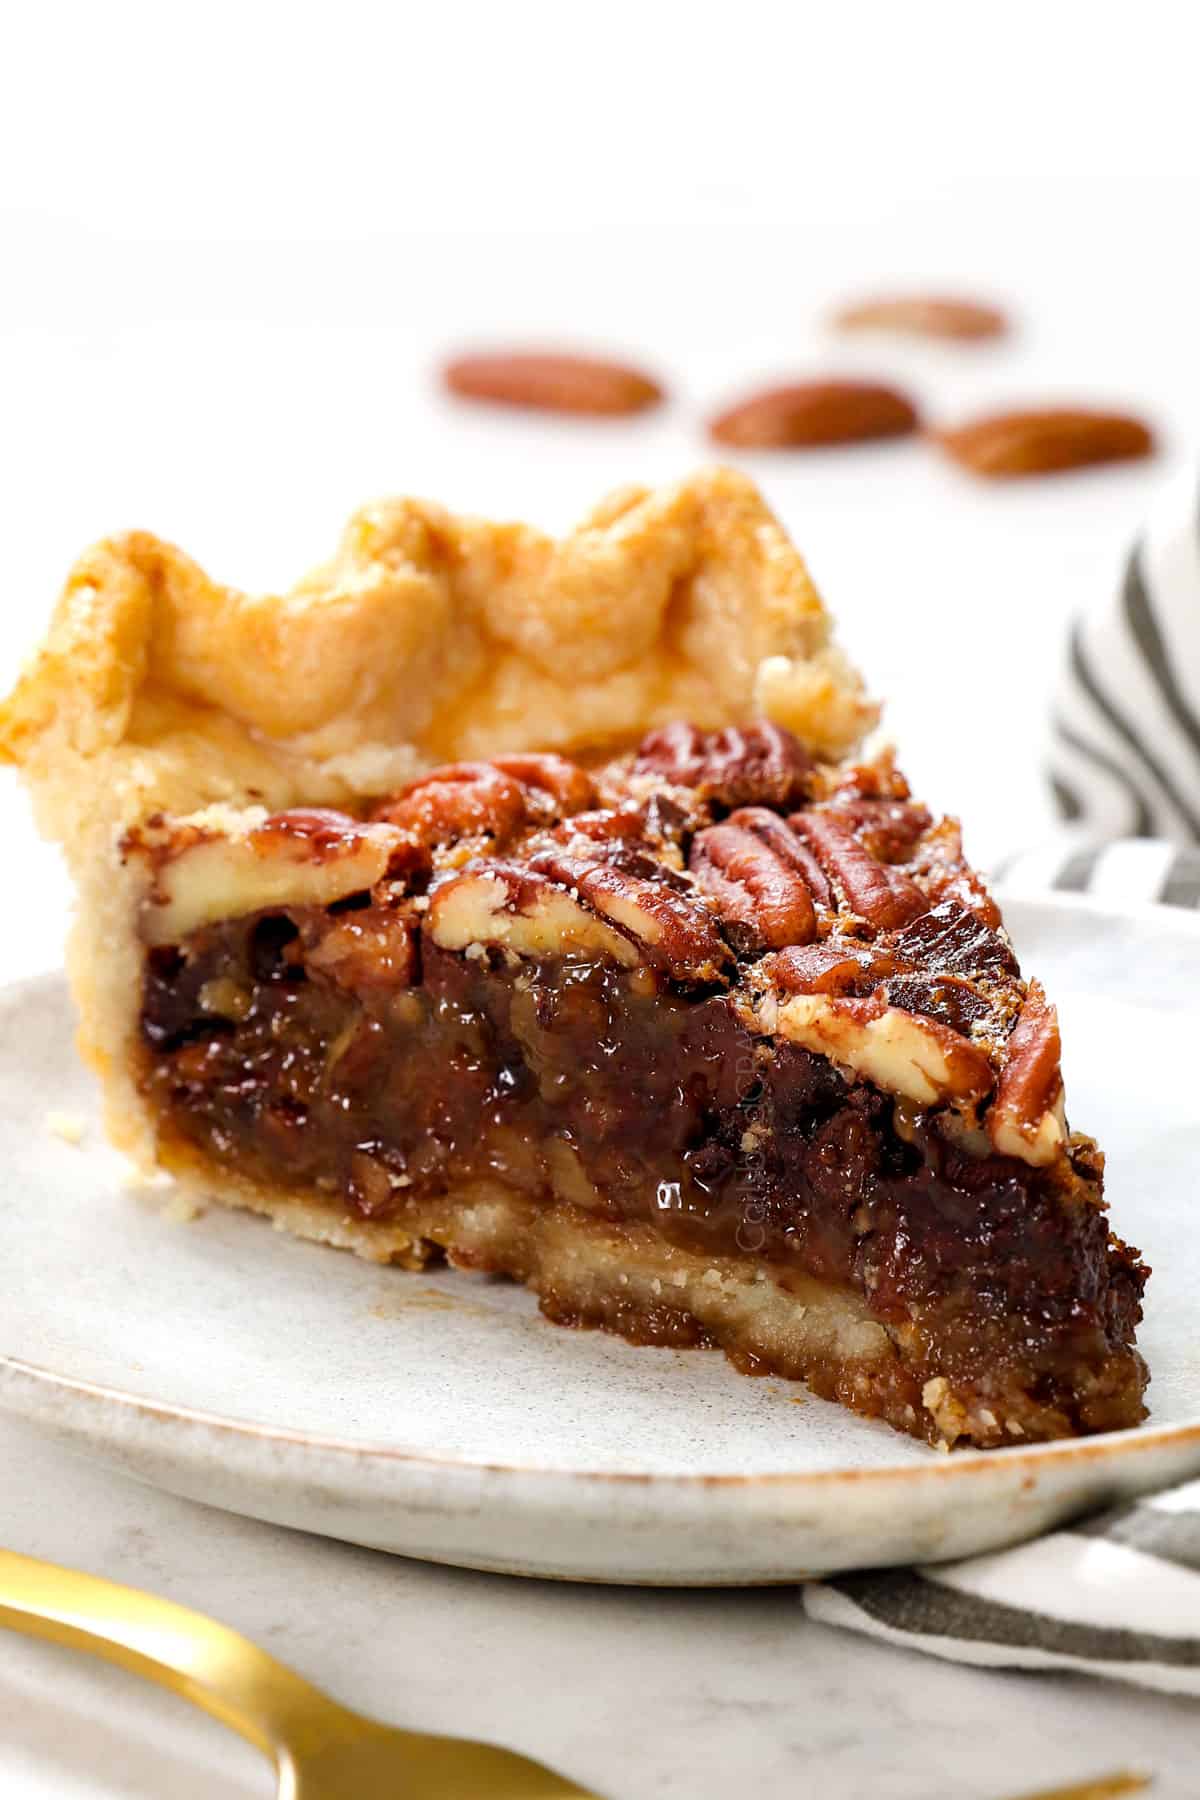 a slice of chocolate pecan pie recipe showing the gooey filling